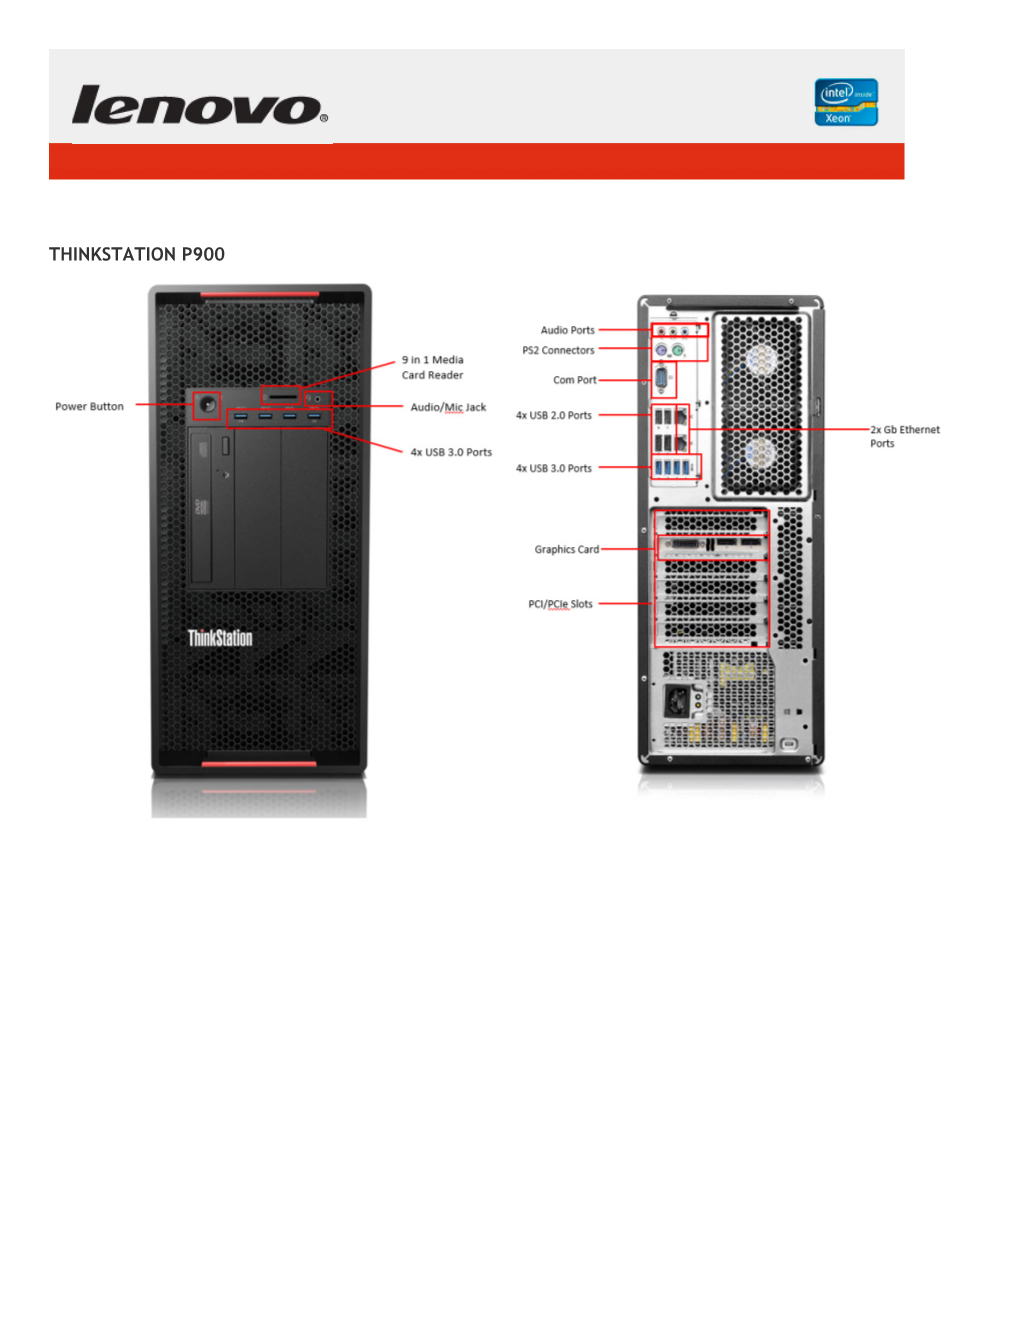 THINKSTATION P900 Product Overview the Thinkstation P900 Is High Performance Dual Socket Workstation